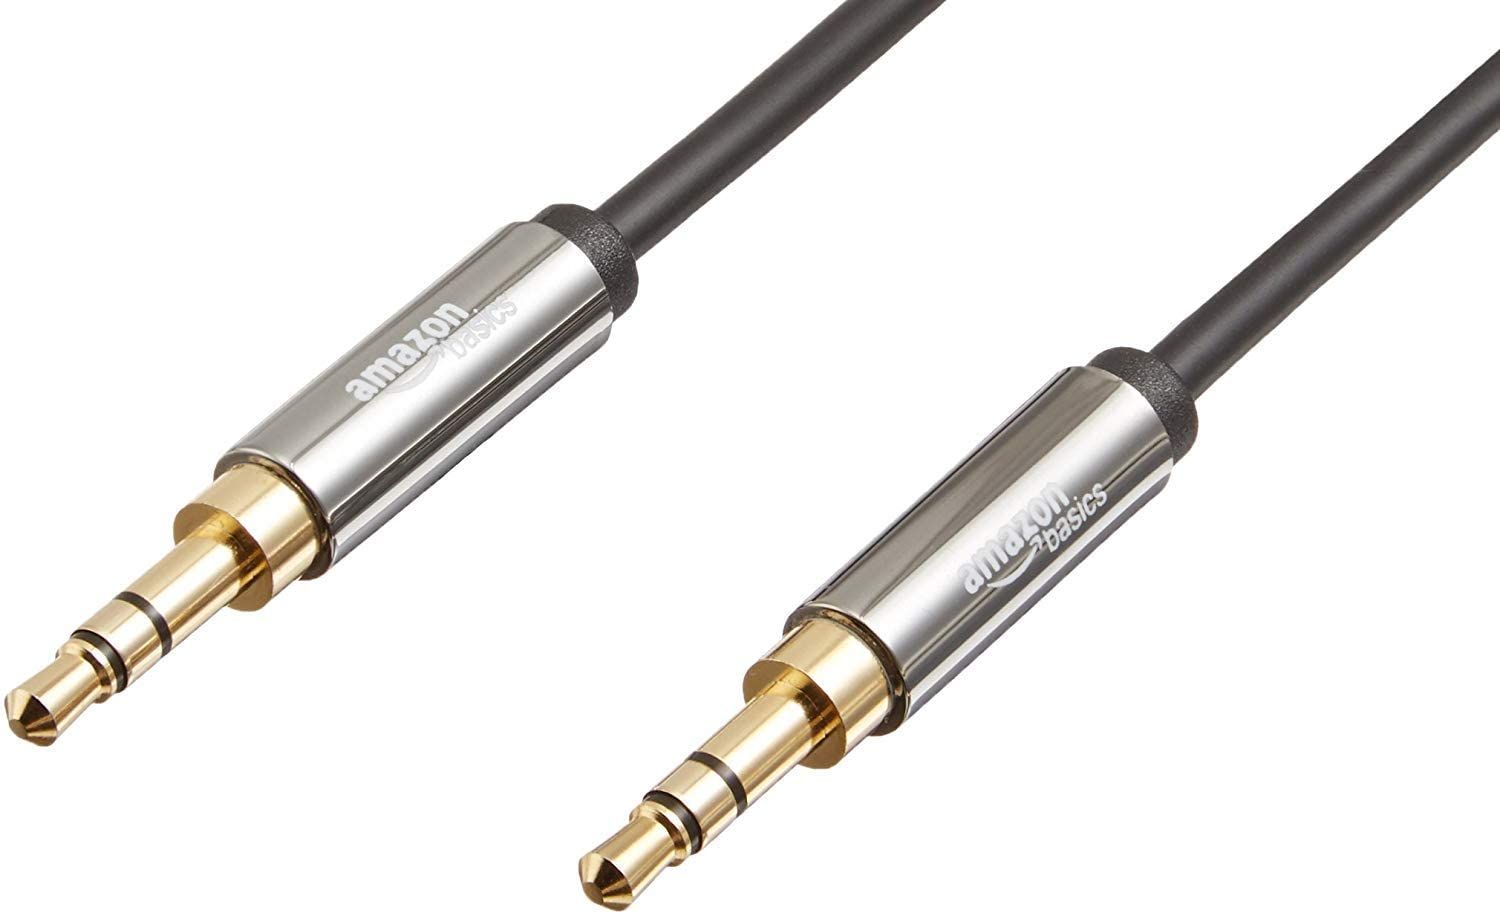 Amazon Basics 3.5 mm Male to Male Stereo Audio Cable